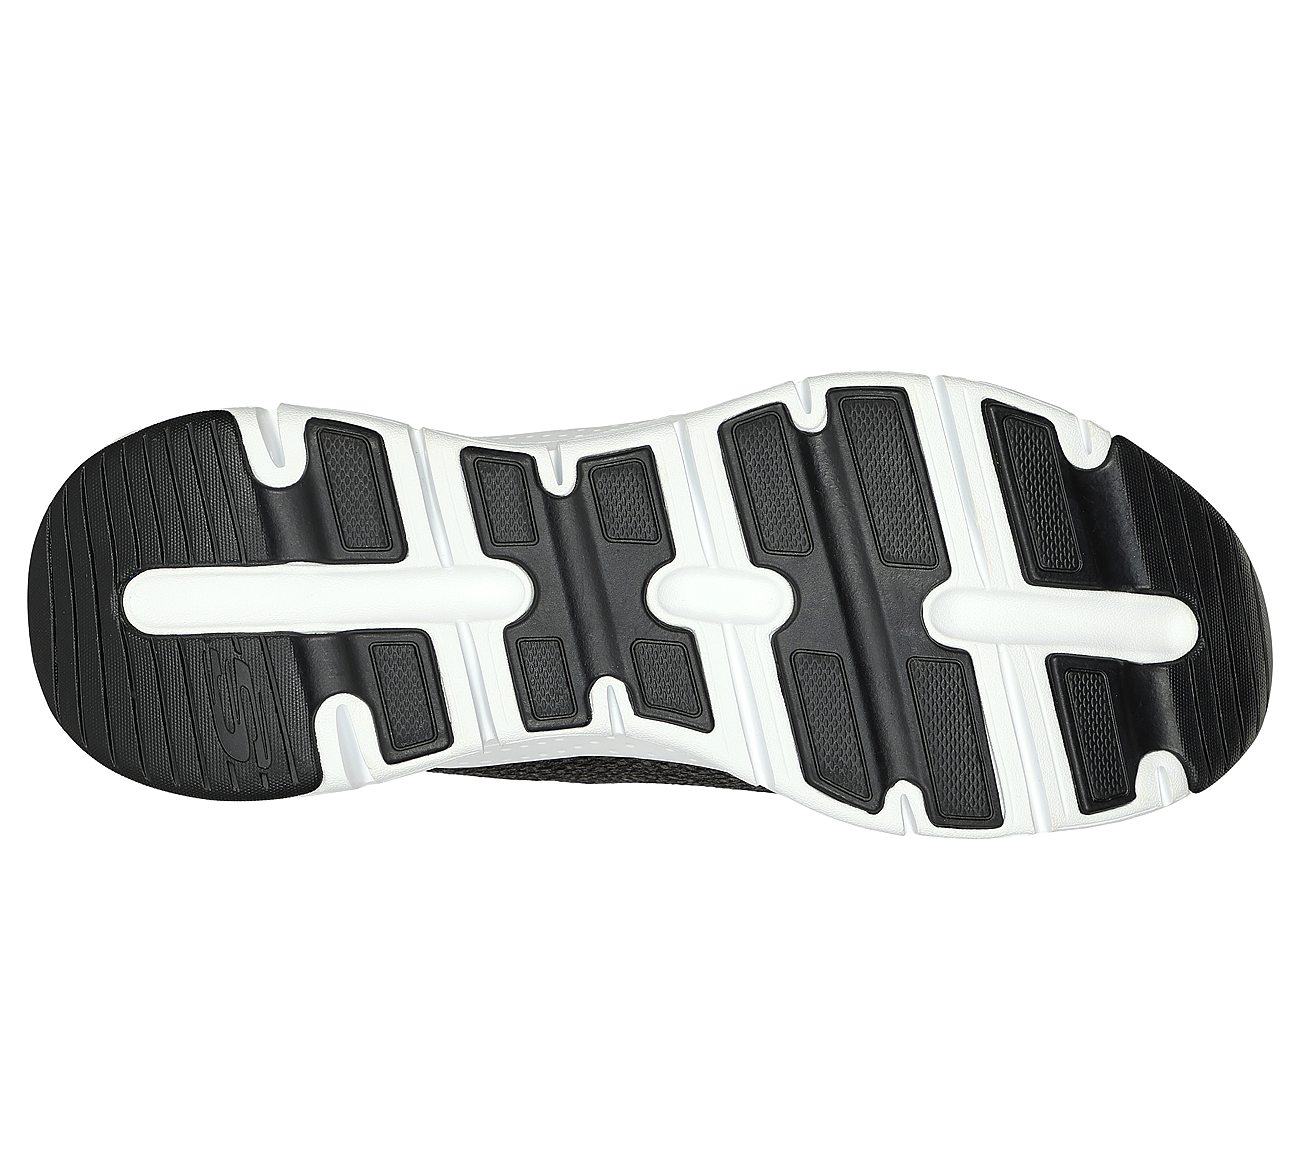 ARCH FIT, BLACK/WHITE Footwear Bottom View